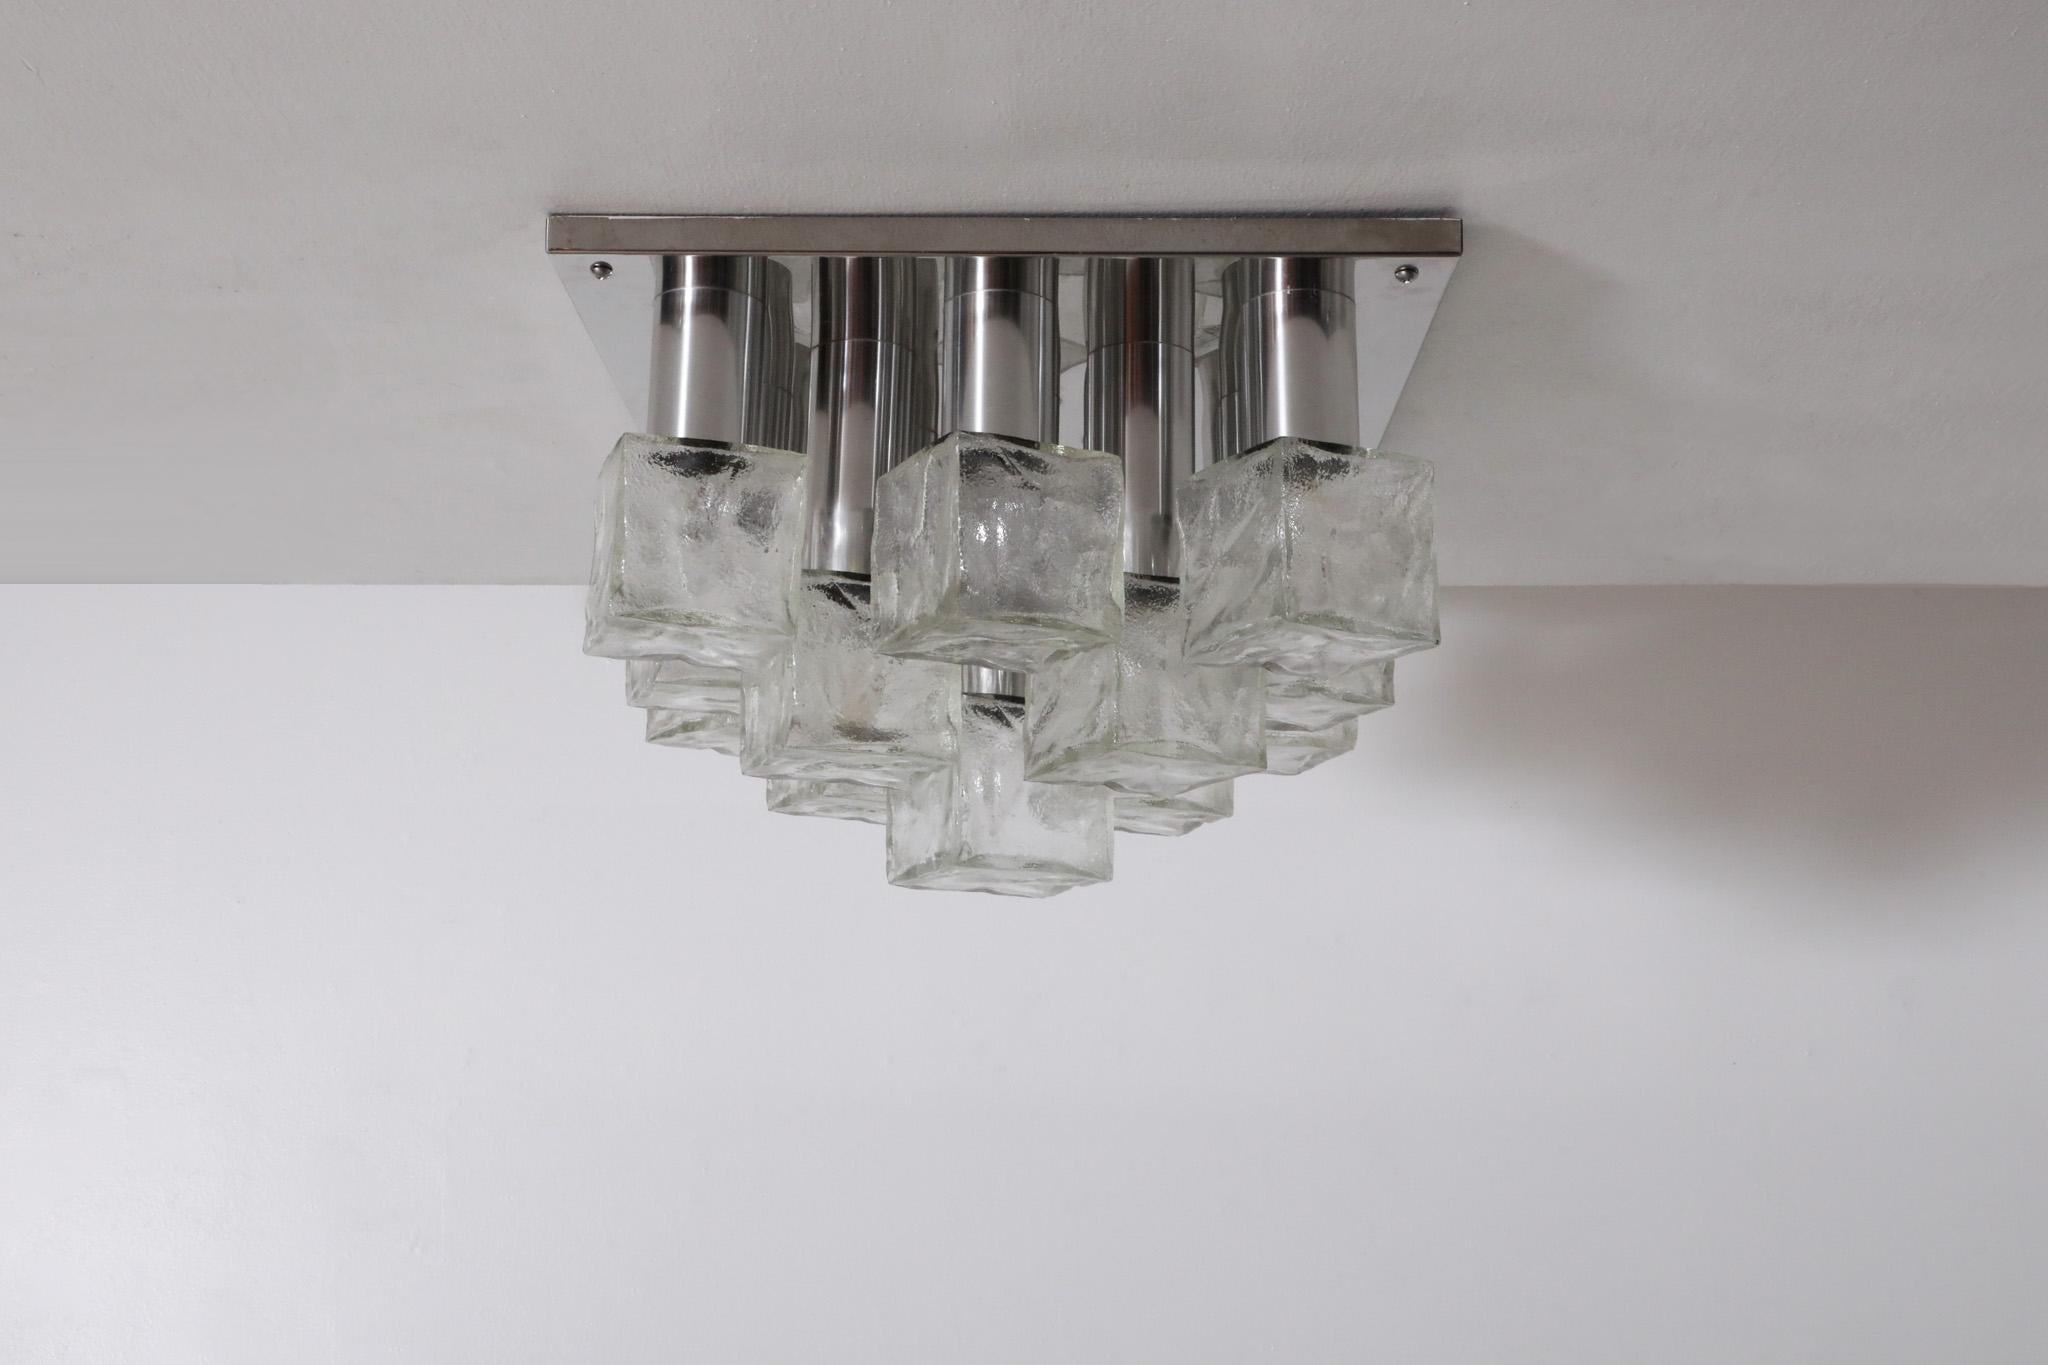 Chrome and glass flush mount ceiling light designed by J.T. Kalmar for Franken KG. Light has a flush base and 13 lights with tiered pressed glass cube shades. Kalmar, known for producing luxury luminaires and bespoke lighting, was founded in 1881.